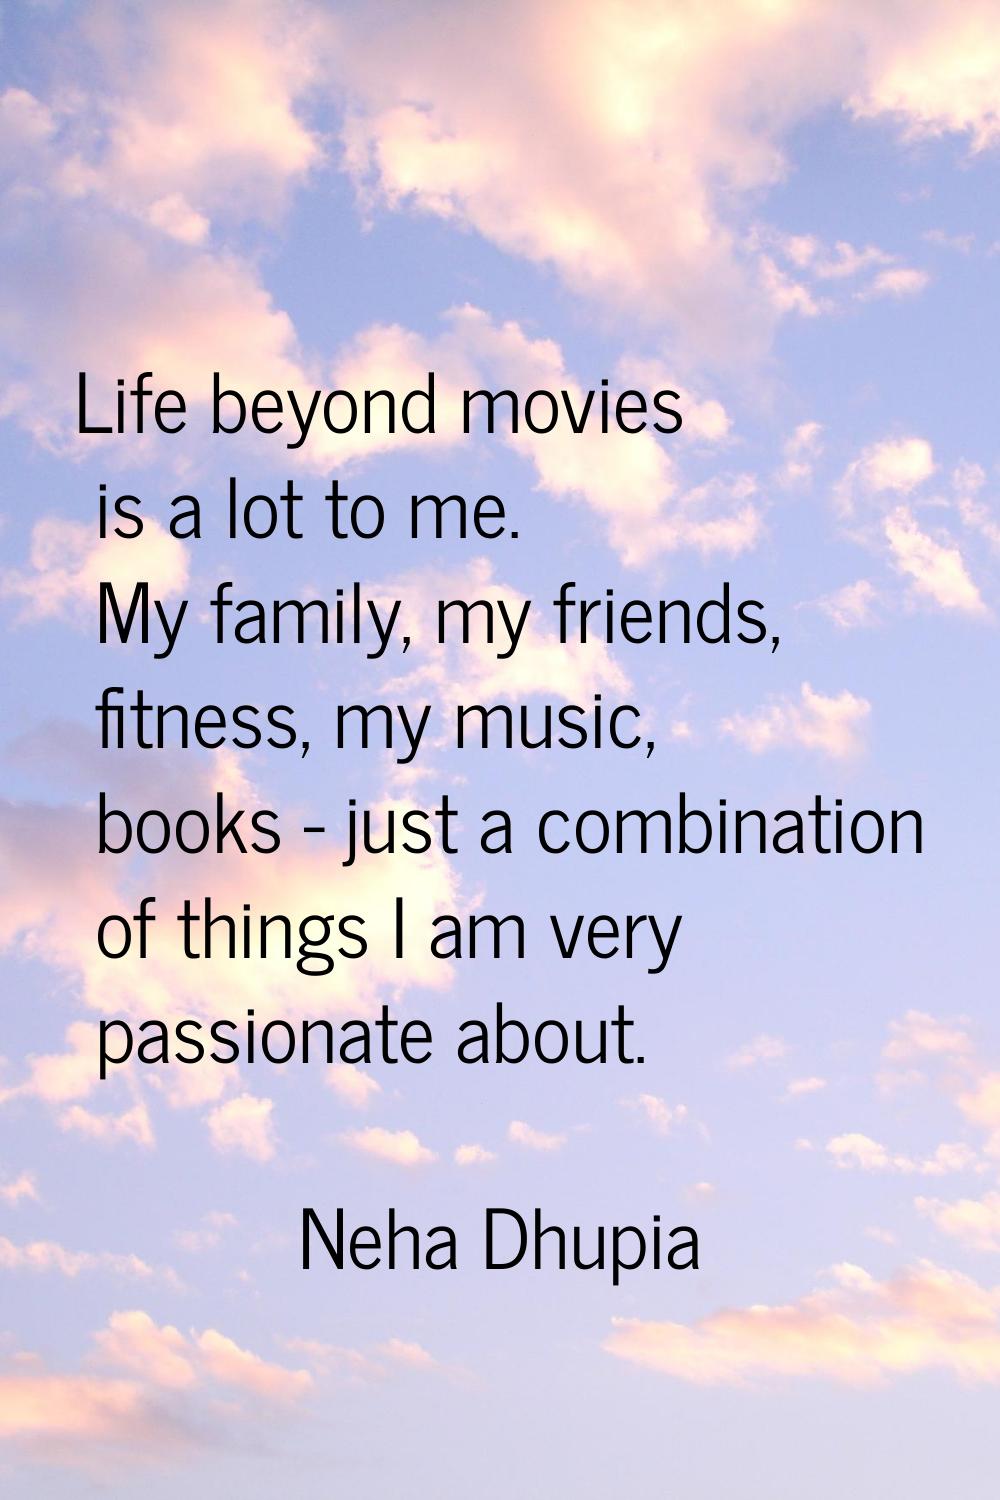 Life beyond movies is a lot to me. My family, my friends, fitness, my music, books - just a combina